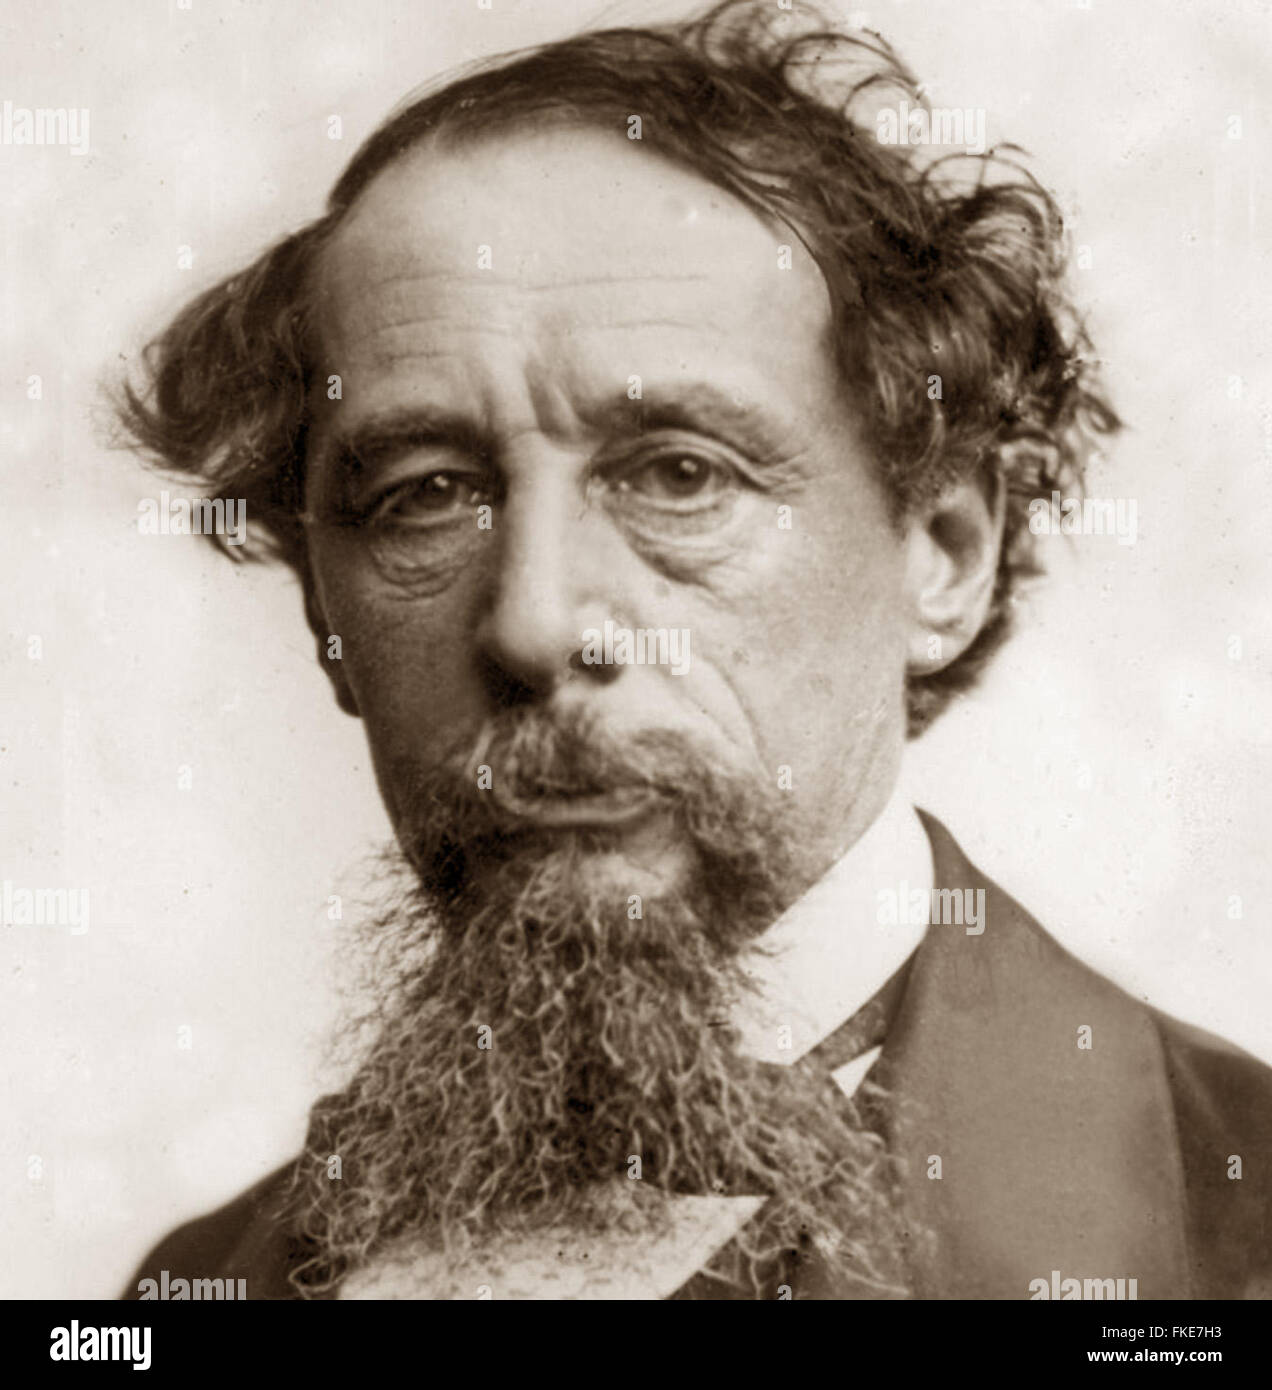 Charles John Huffam Dickens was an English writer and social critic. He created some of the world's best-known fictional characters and is regarded as the greatest novelist of the Victorian era, From the archives of Press Portrait Service - formerly Press Portrait Bureau Stock Photo